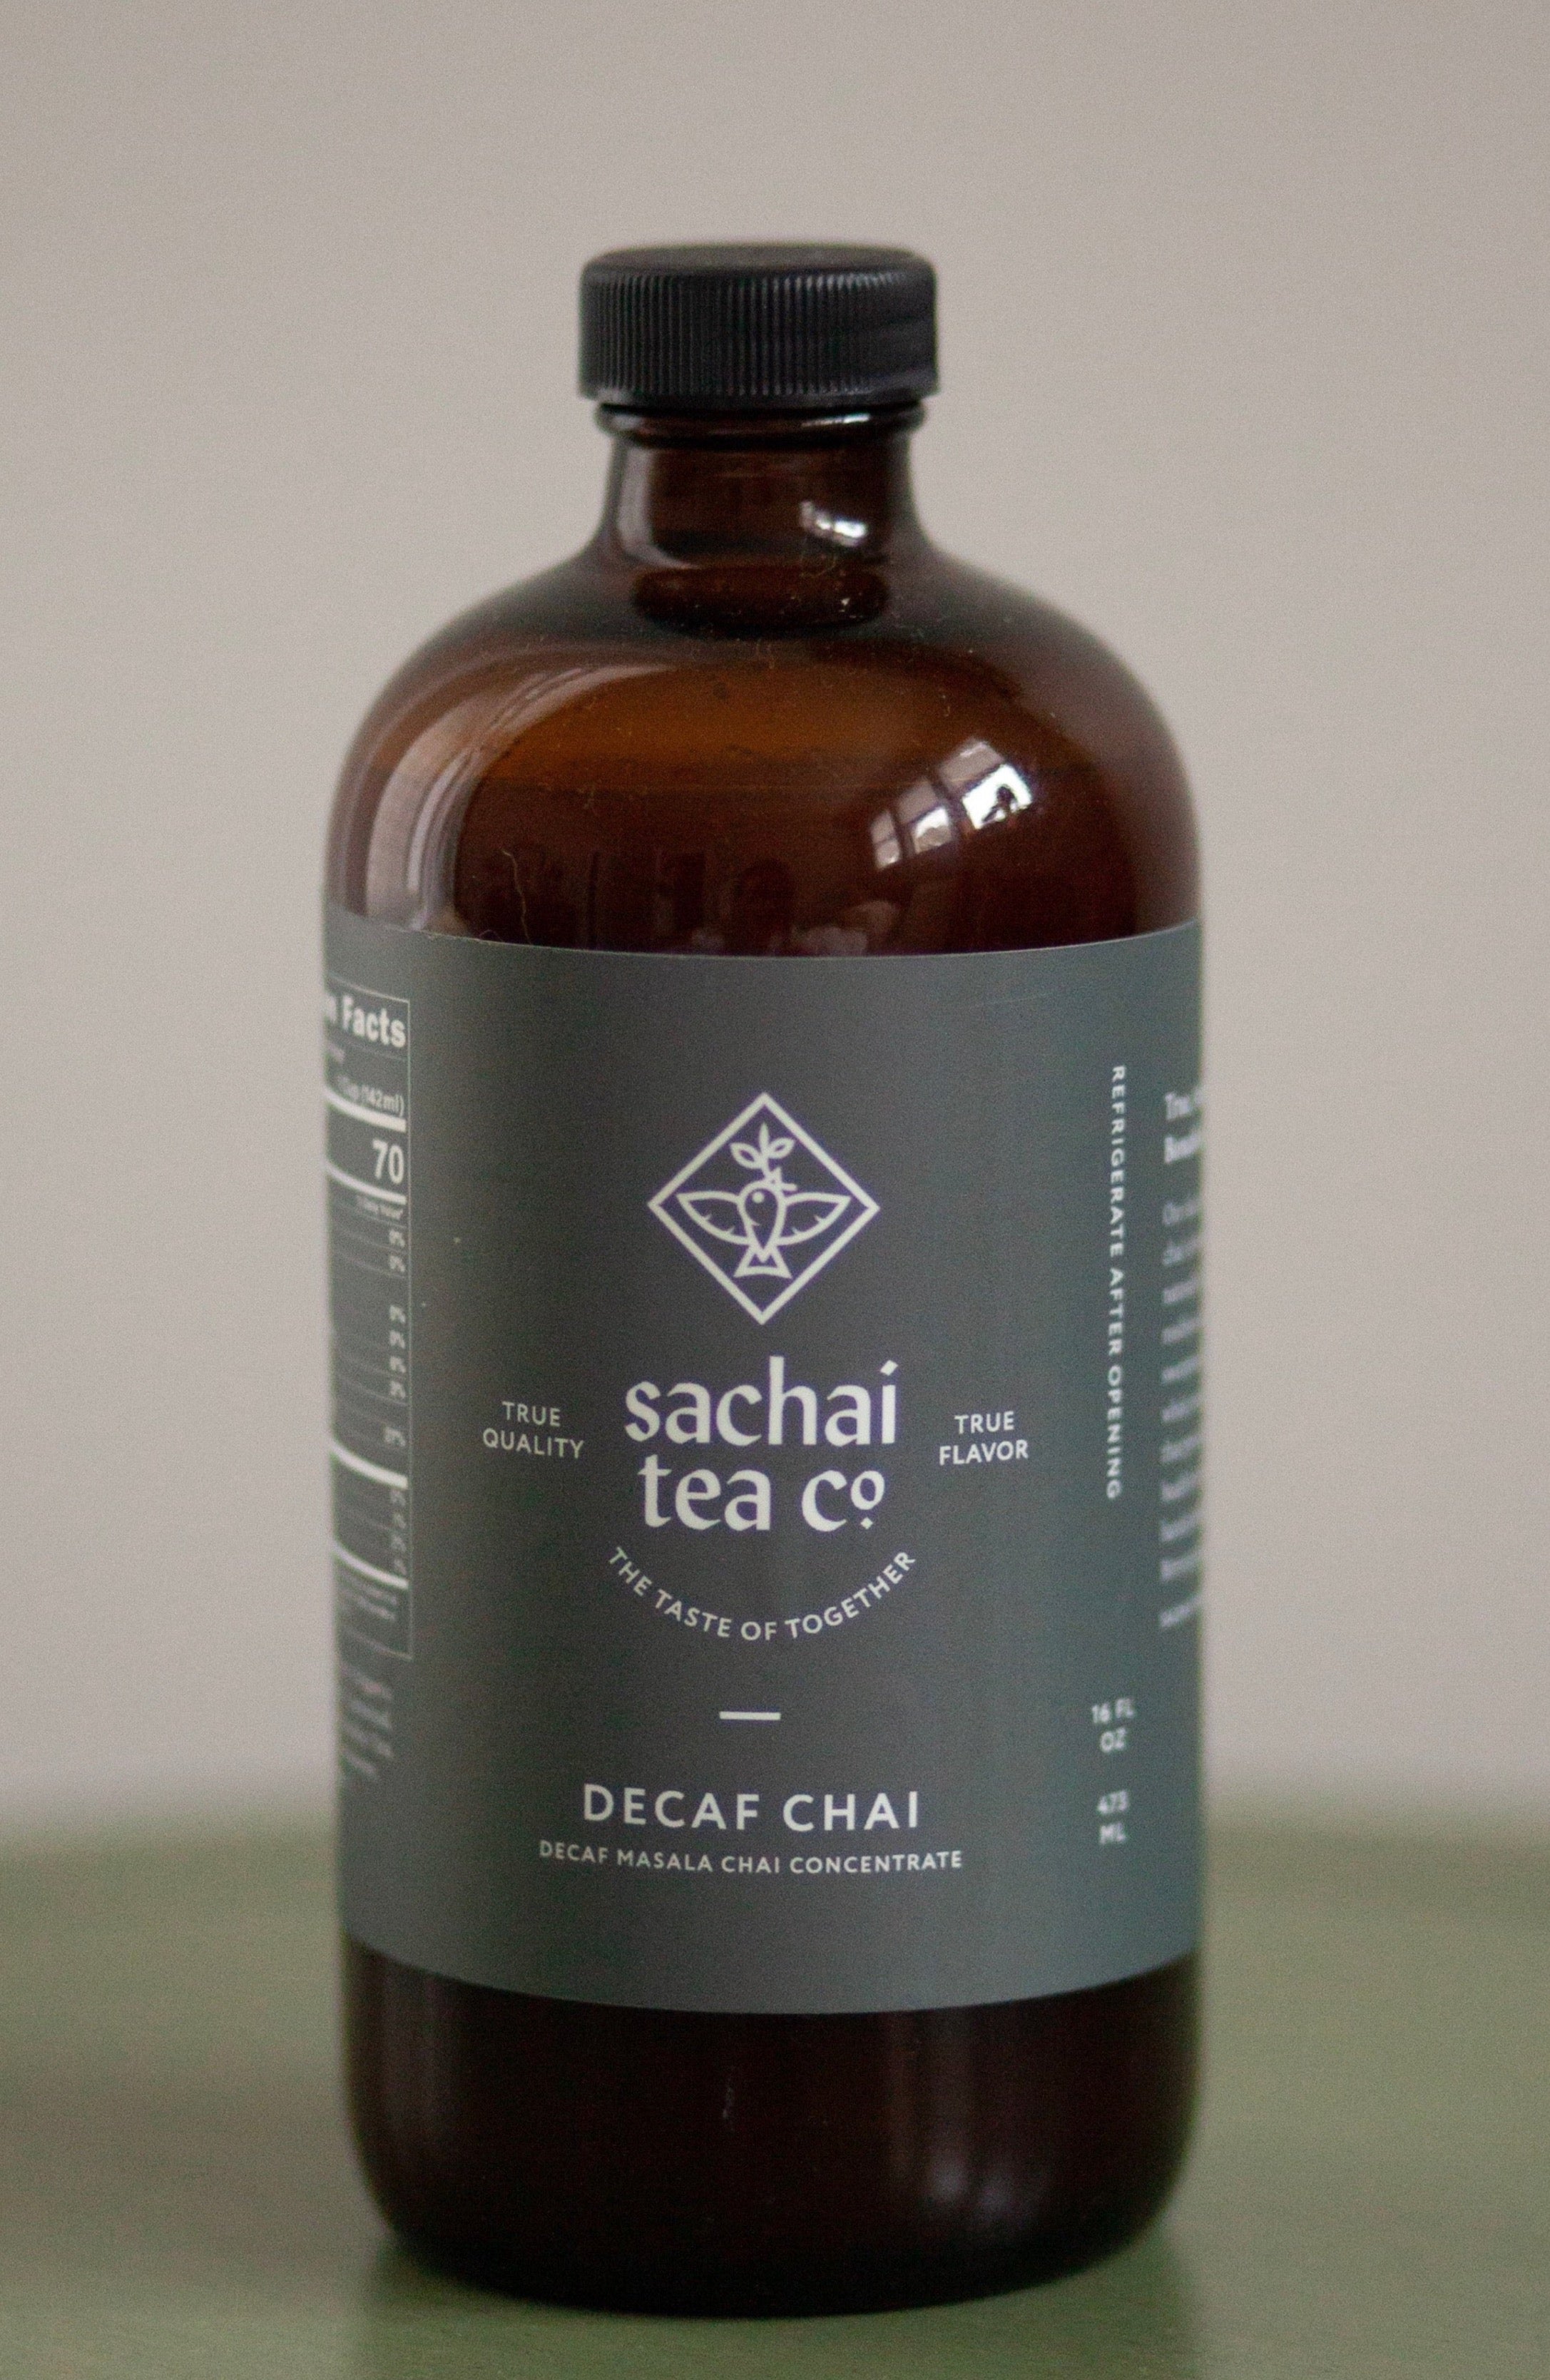 Decaf Masala Chai Concentrate